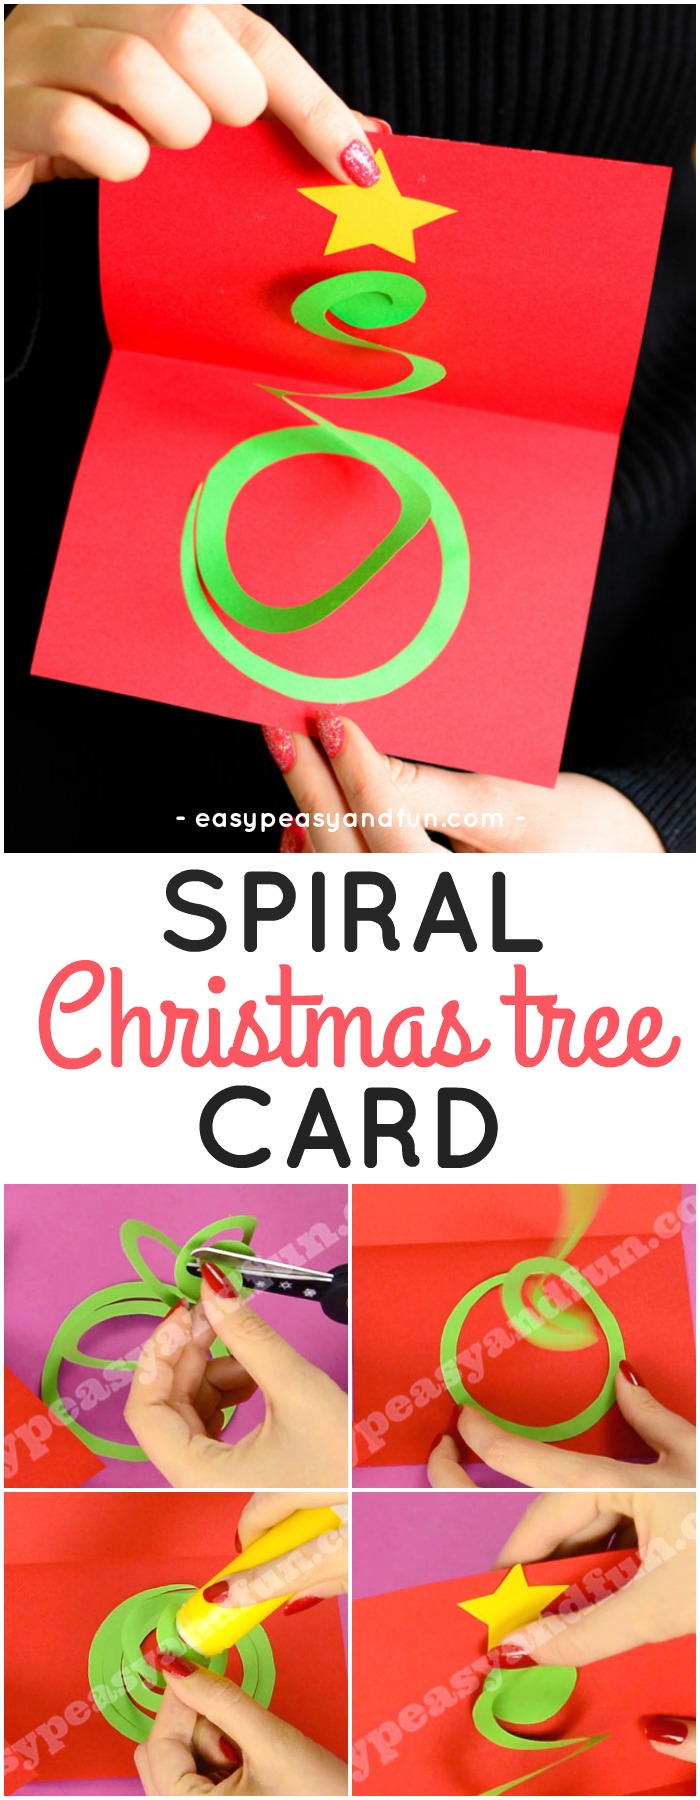 Spiral Christmas tree card idea.  Fun Christmas paper crafts for kids to DIY.  #Christmas Crafts for Kids #Paper Crafts for Kids #DIYChristmas Cards